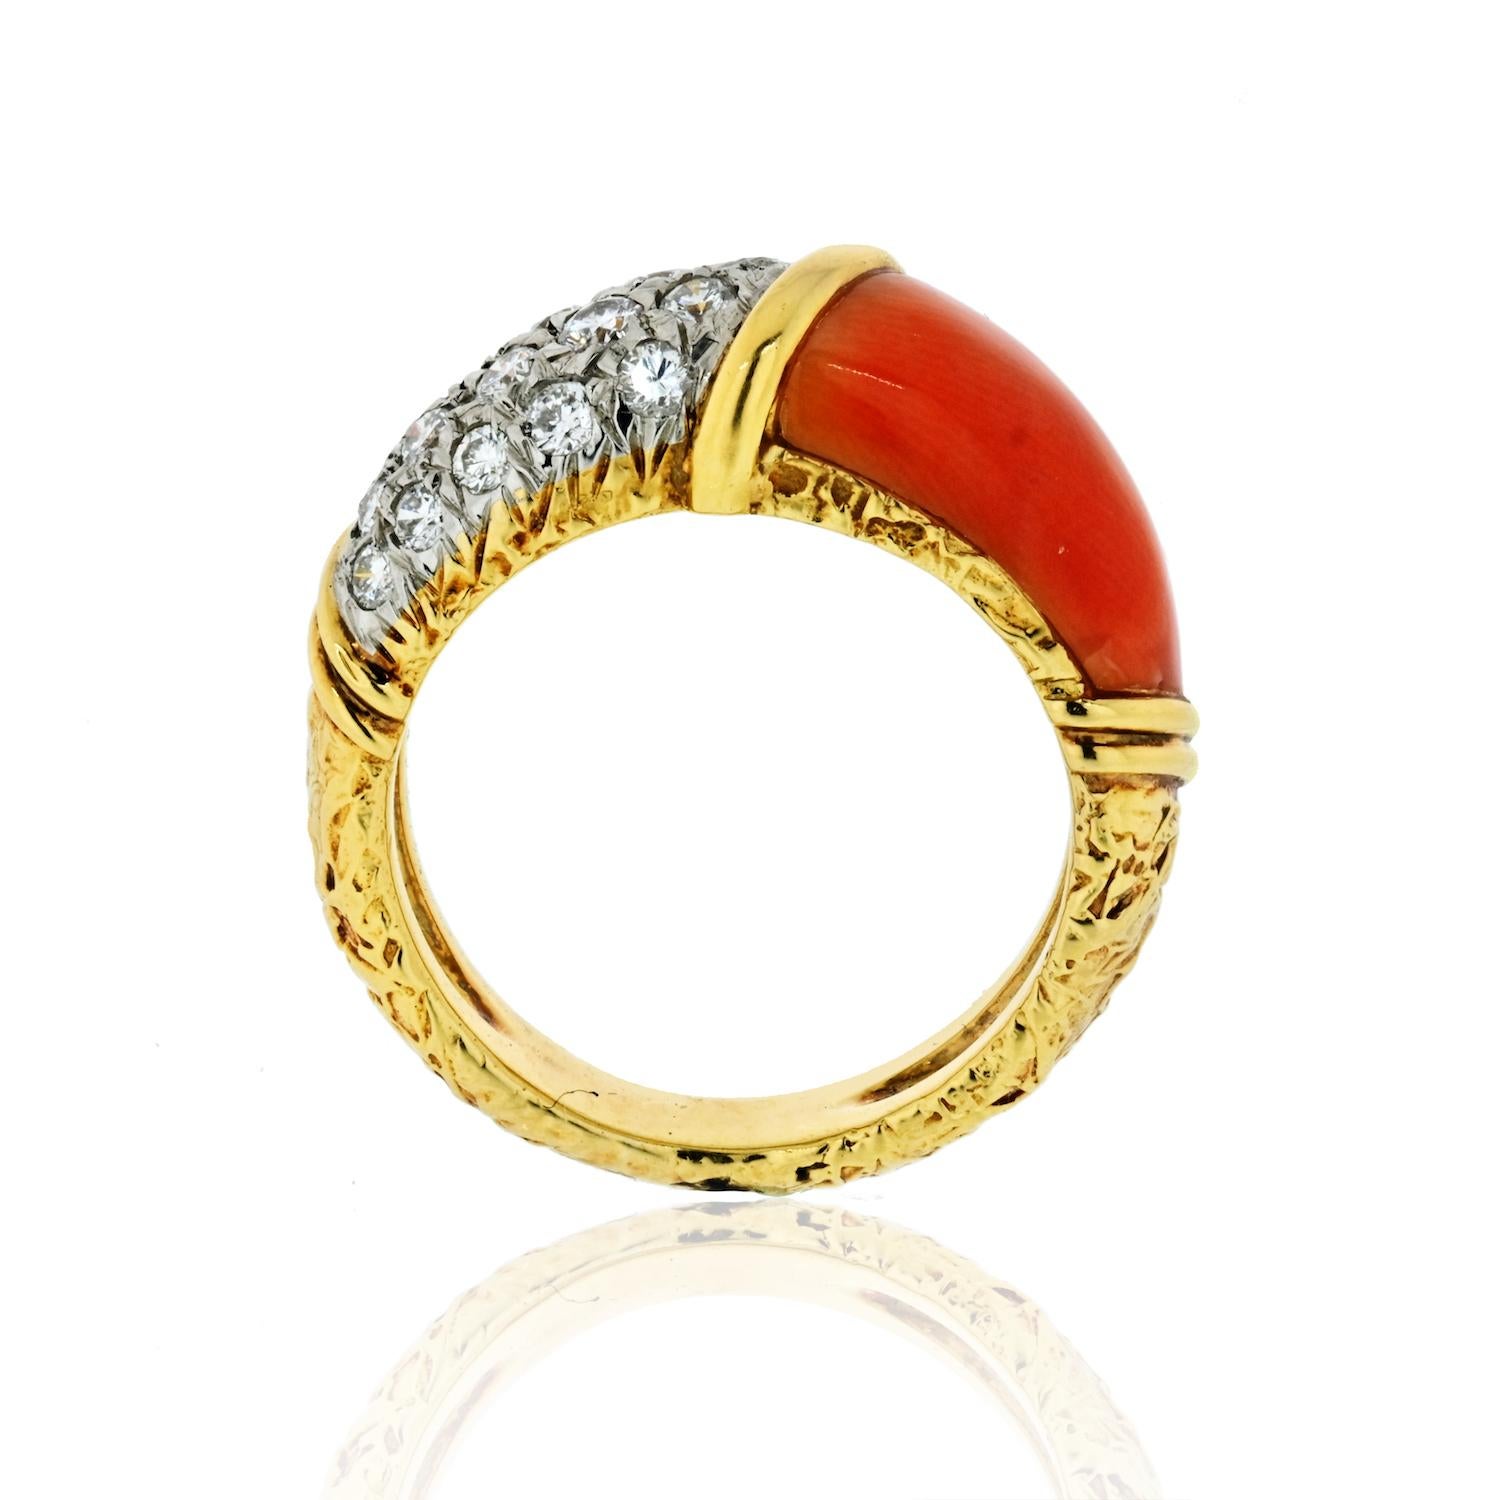 Women's or Men's Van Cleef & Arpels circa 1960 Coral and Diamond Band Ring